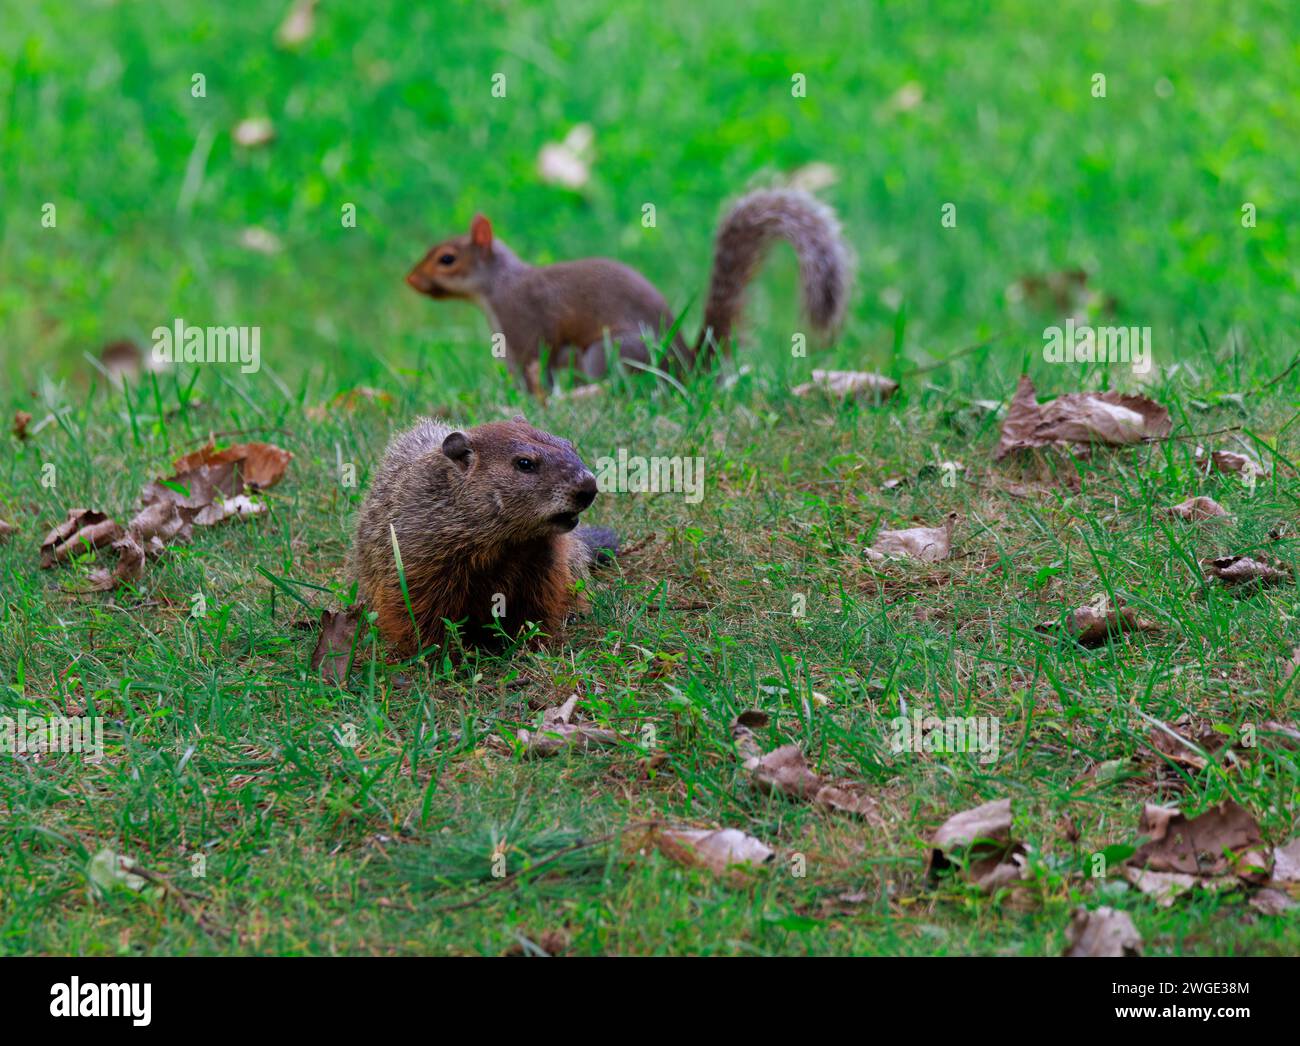 A groundhog in the green grass of a yard or field with gray squirrel in background Stock Photo